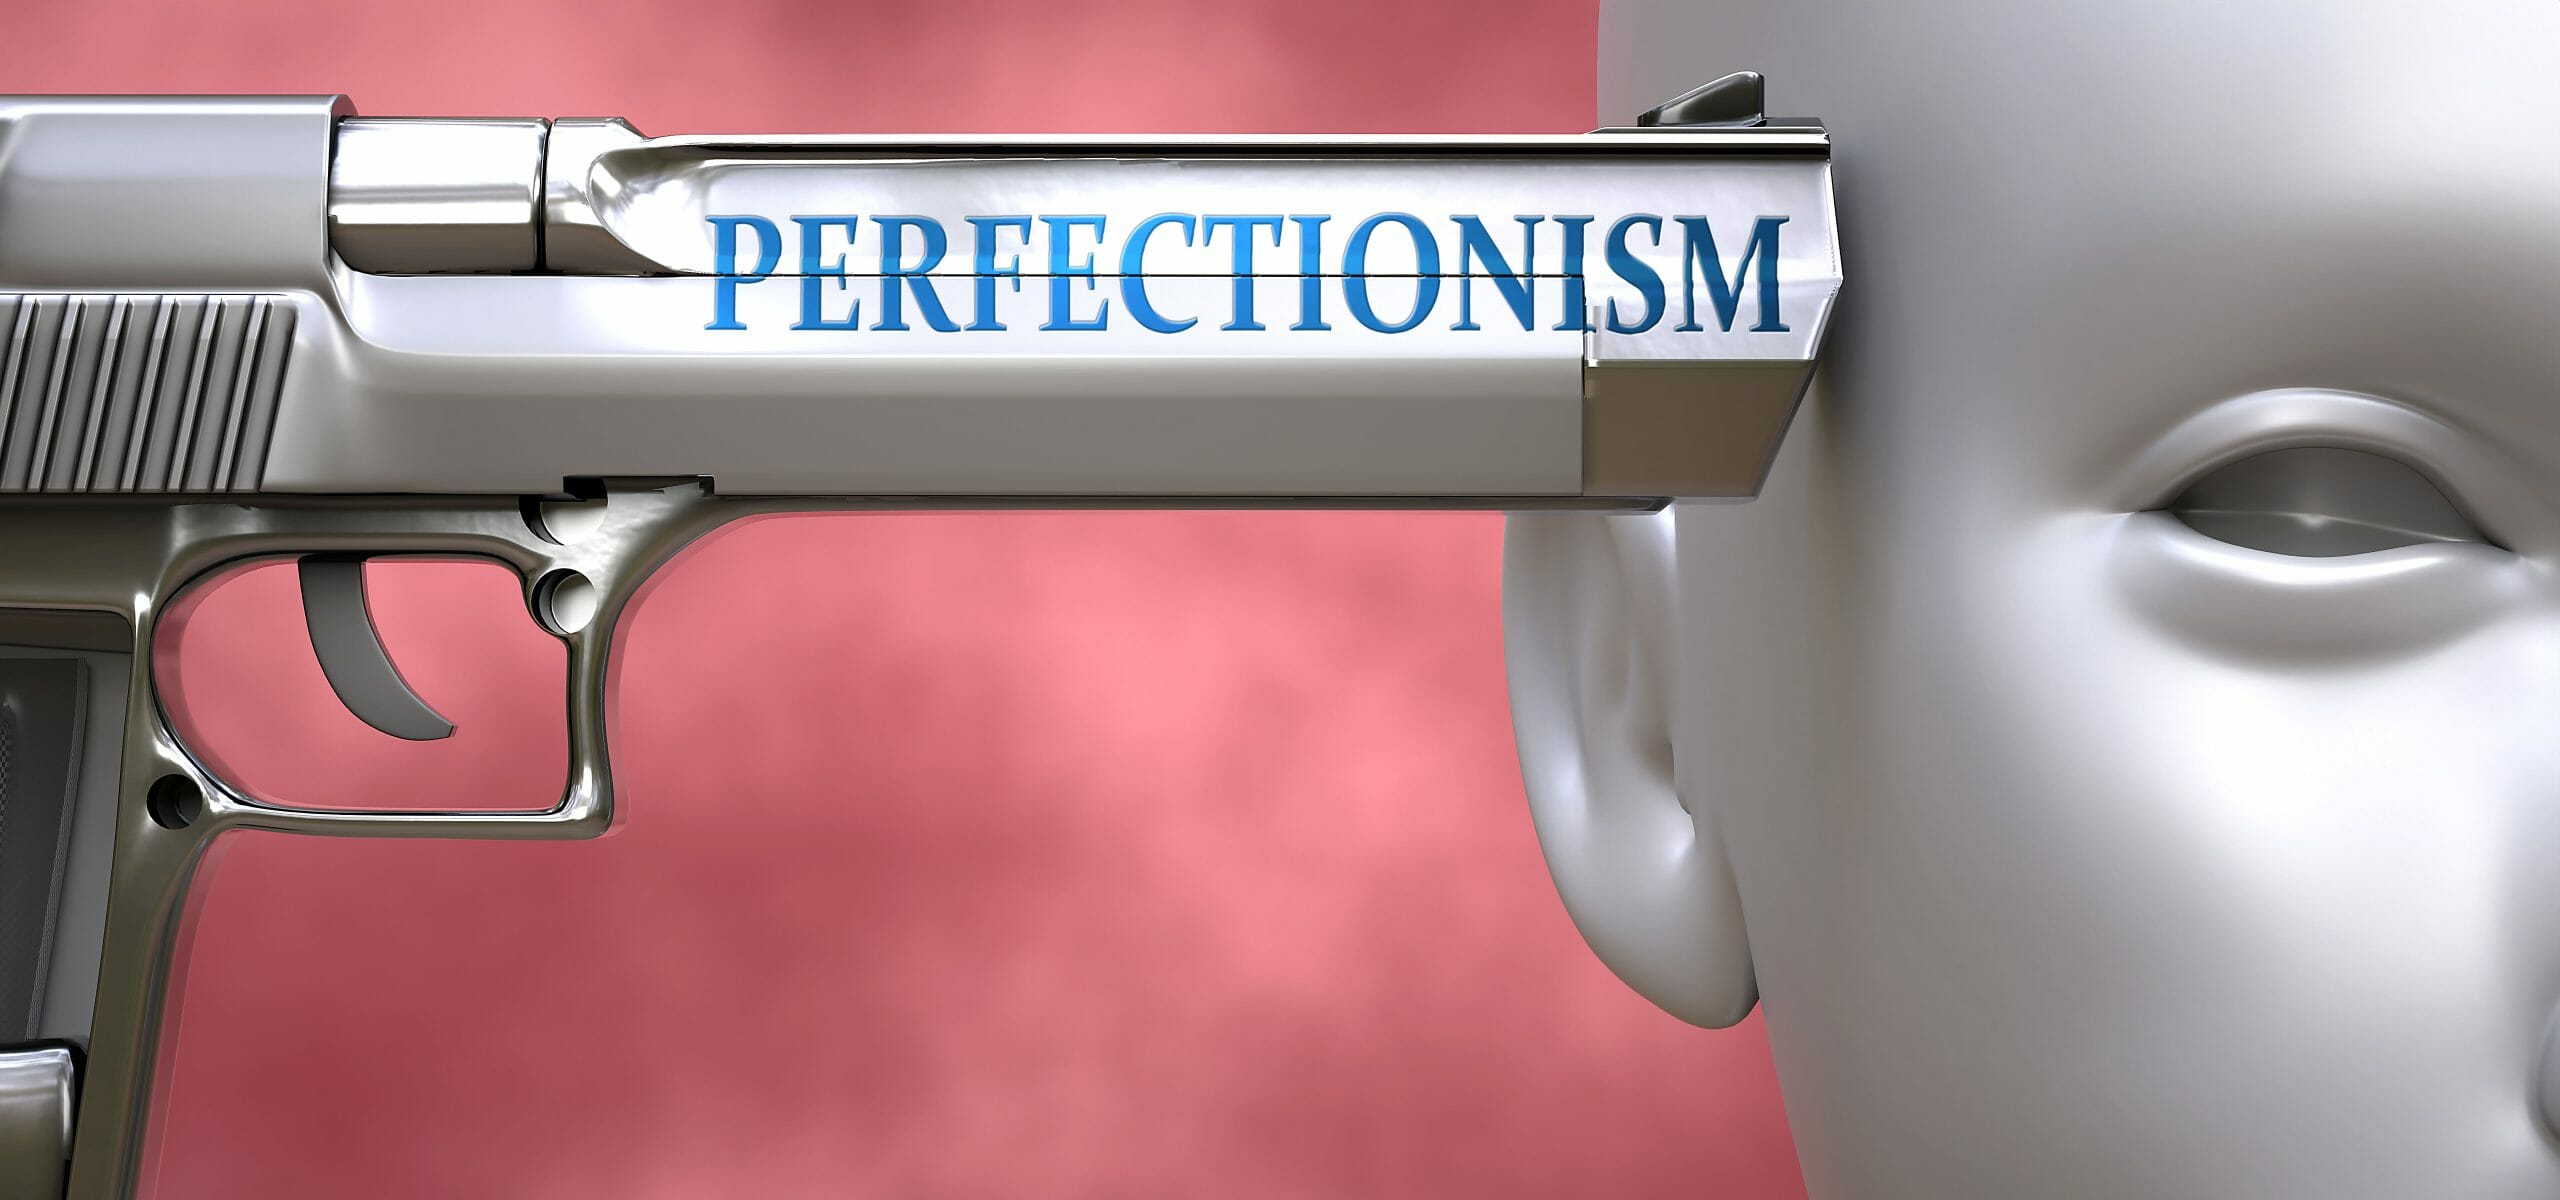 Perfectionism,Can,Be,Dangerous,-,Pictured,As,Word,Perfectionism,On